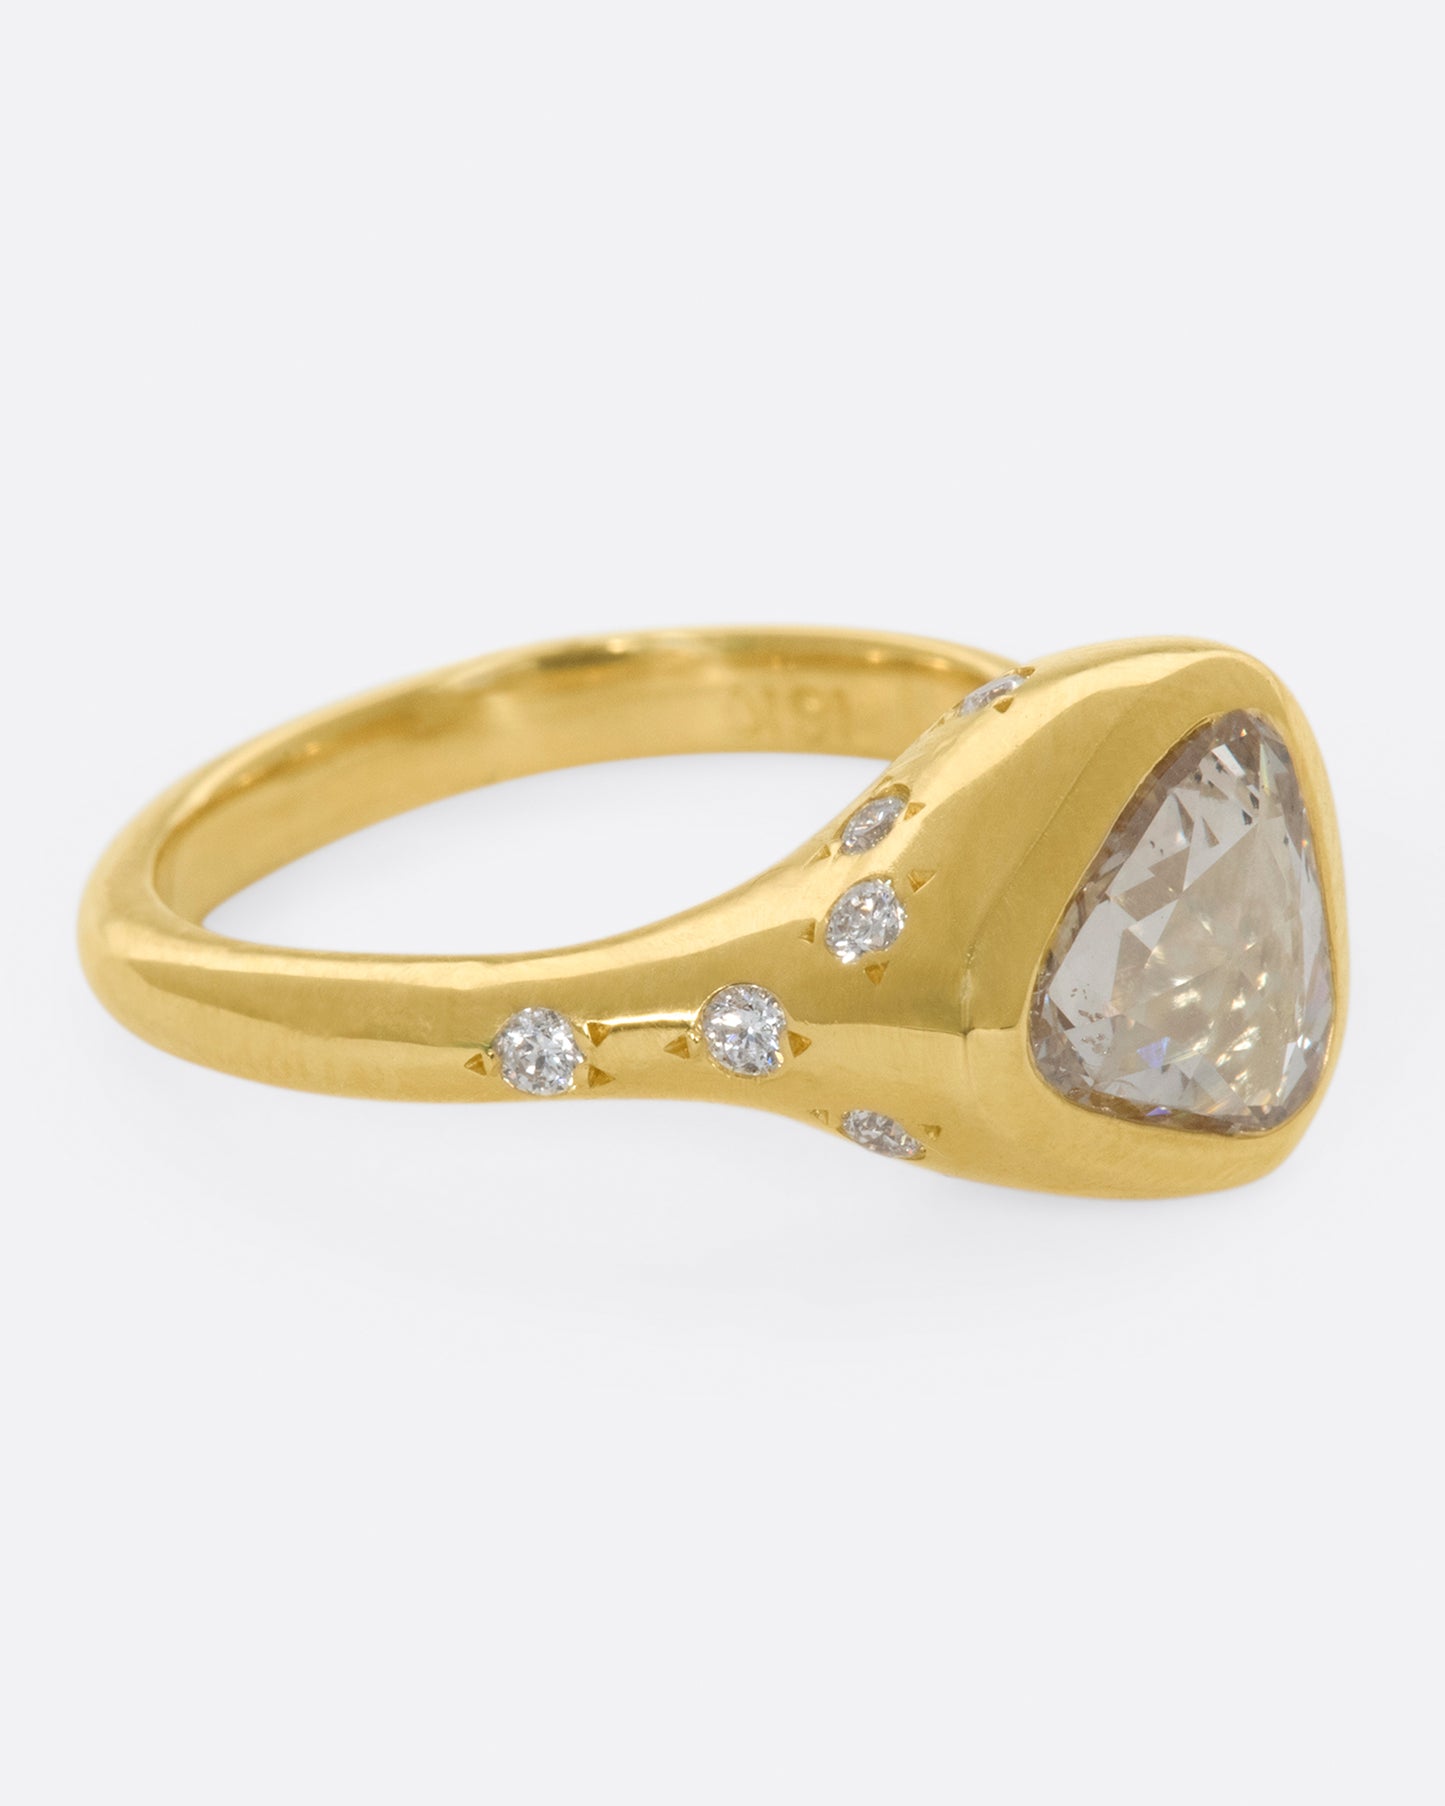 A glorious triangular, rose cut diamond sits on its side giving this ring an east-west sensibility.